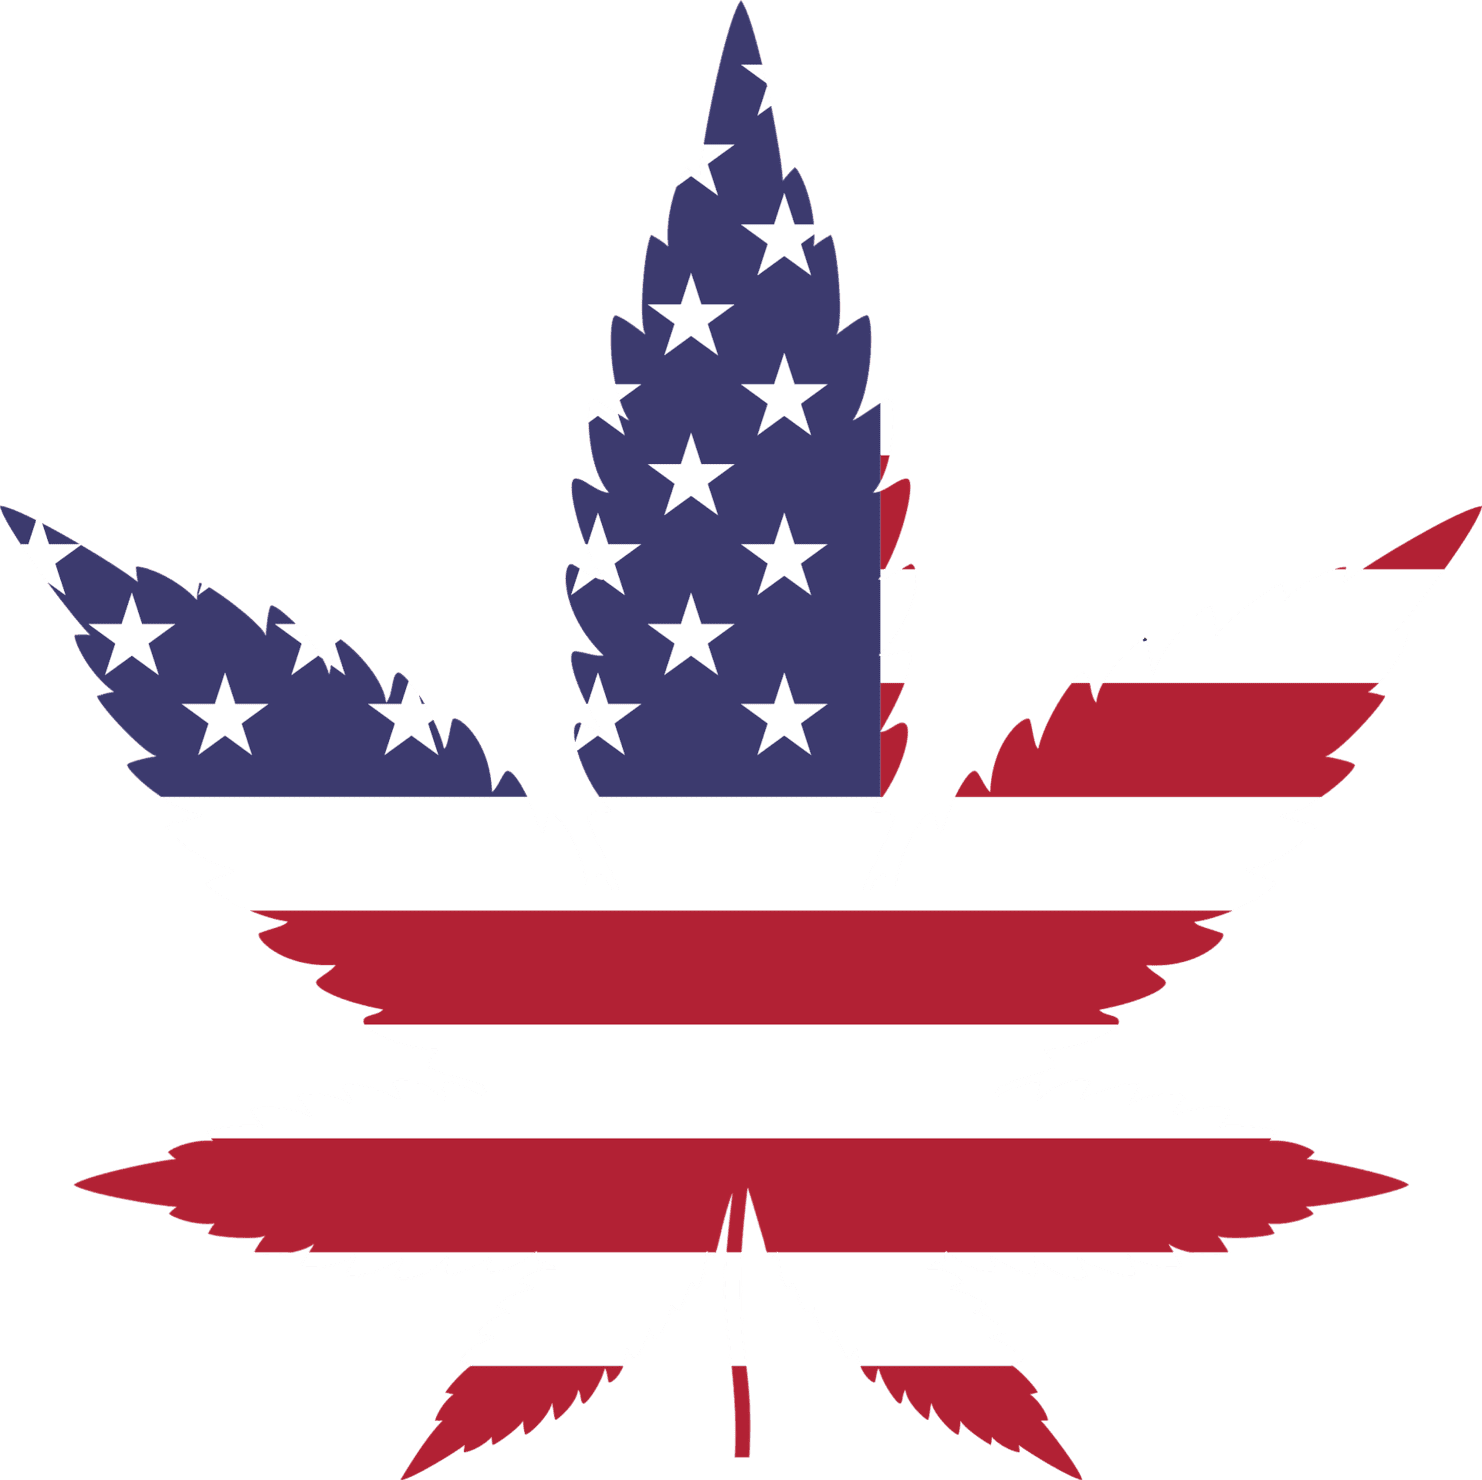 10 States that may legalize marijuana in 2020